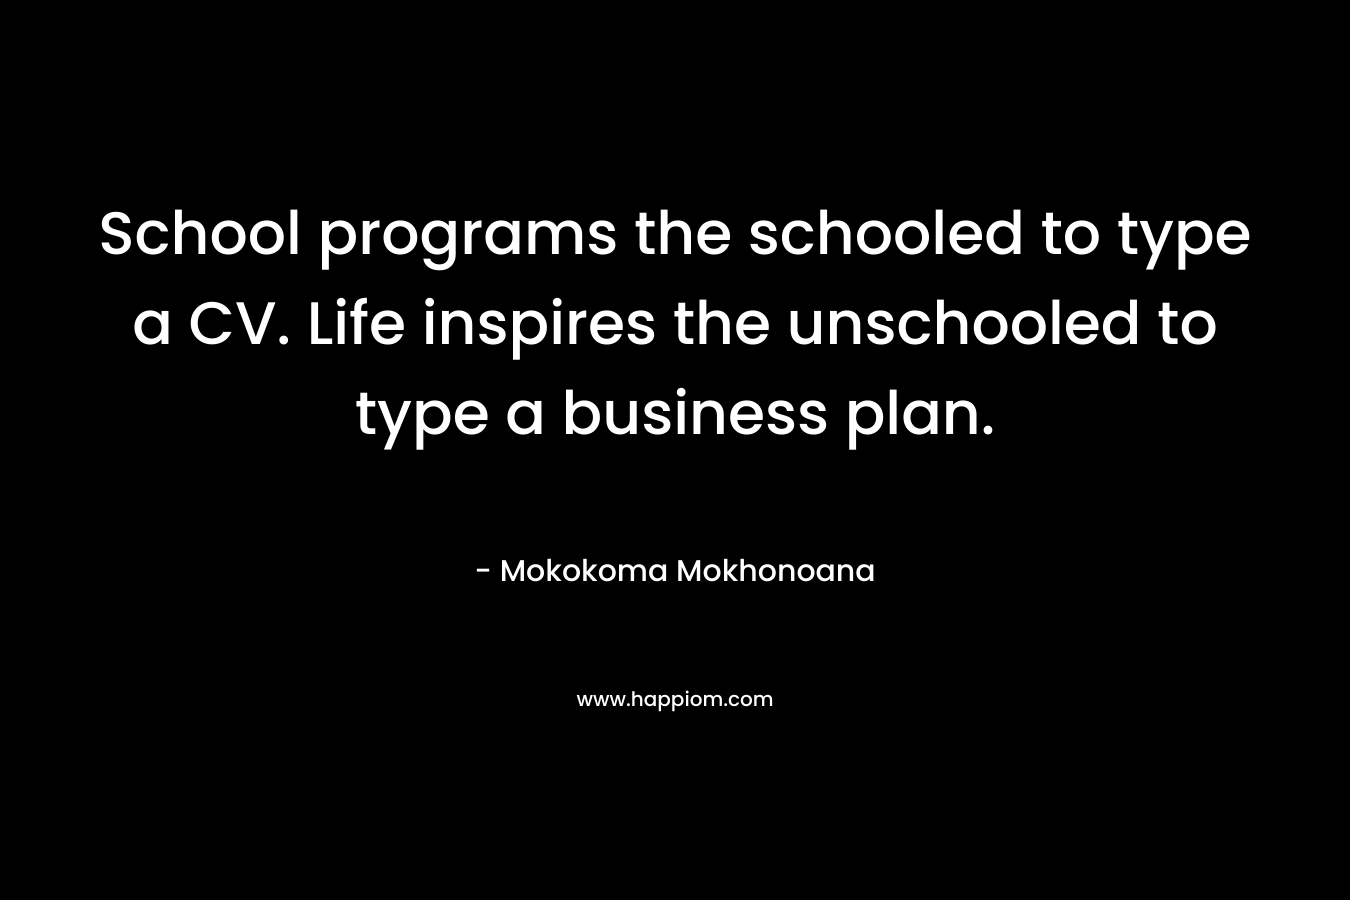 School programs the schooled to type a CV. Life inspires the unschooled to type a business plan.